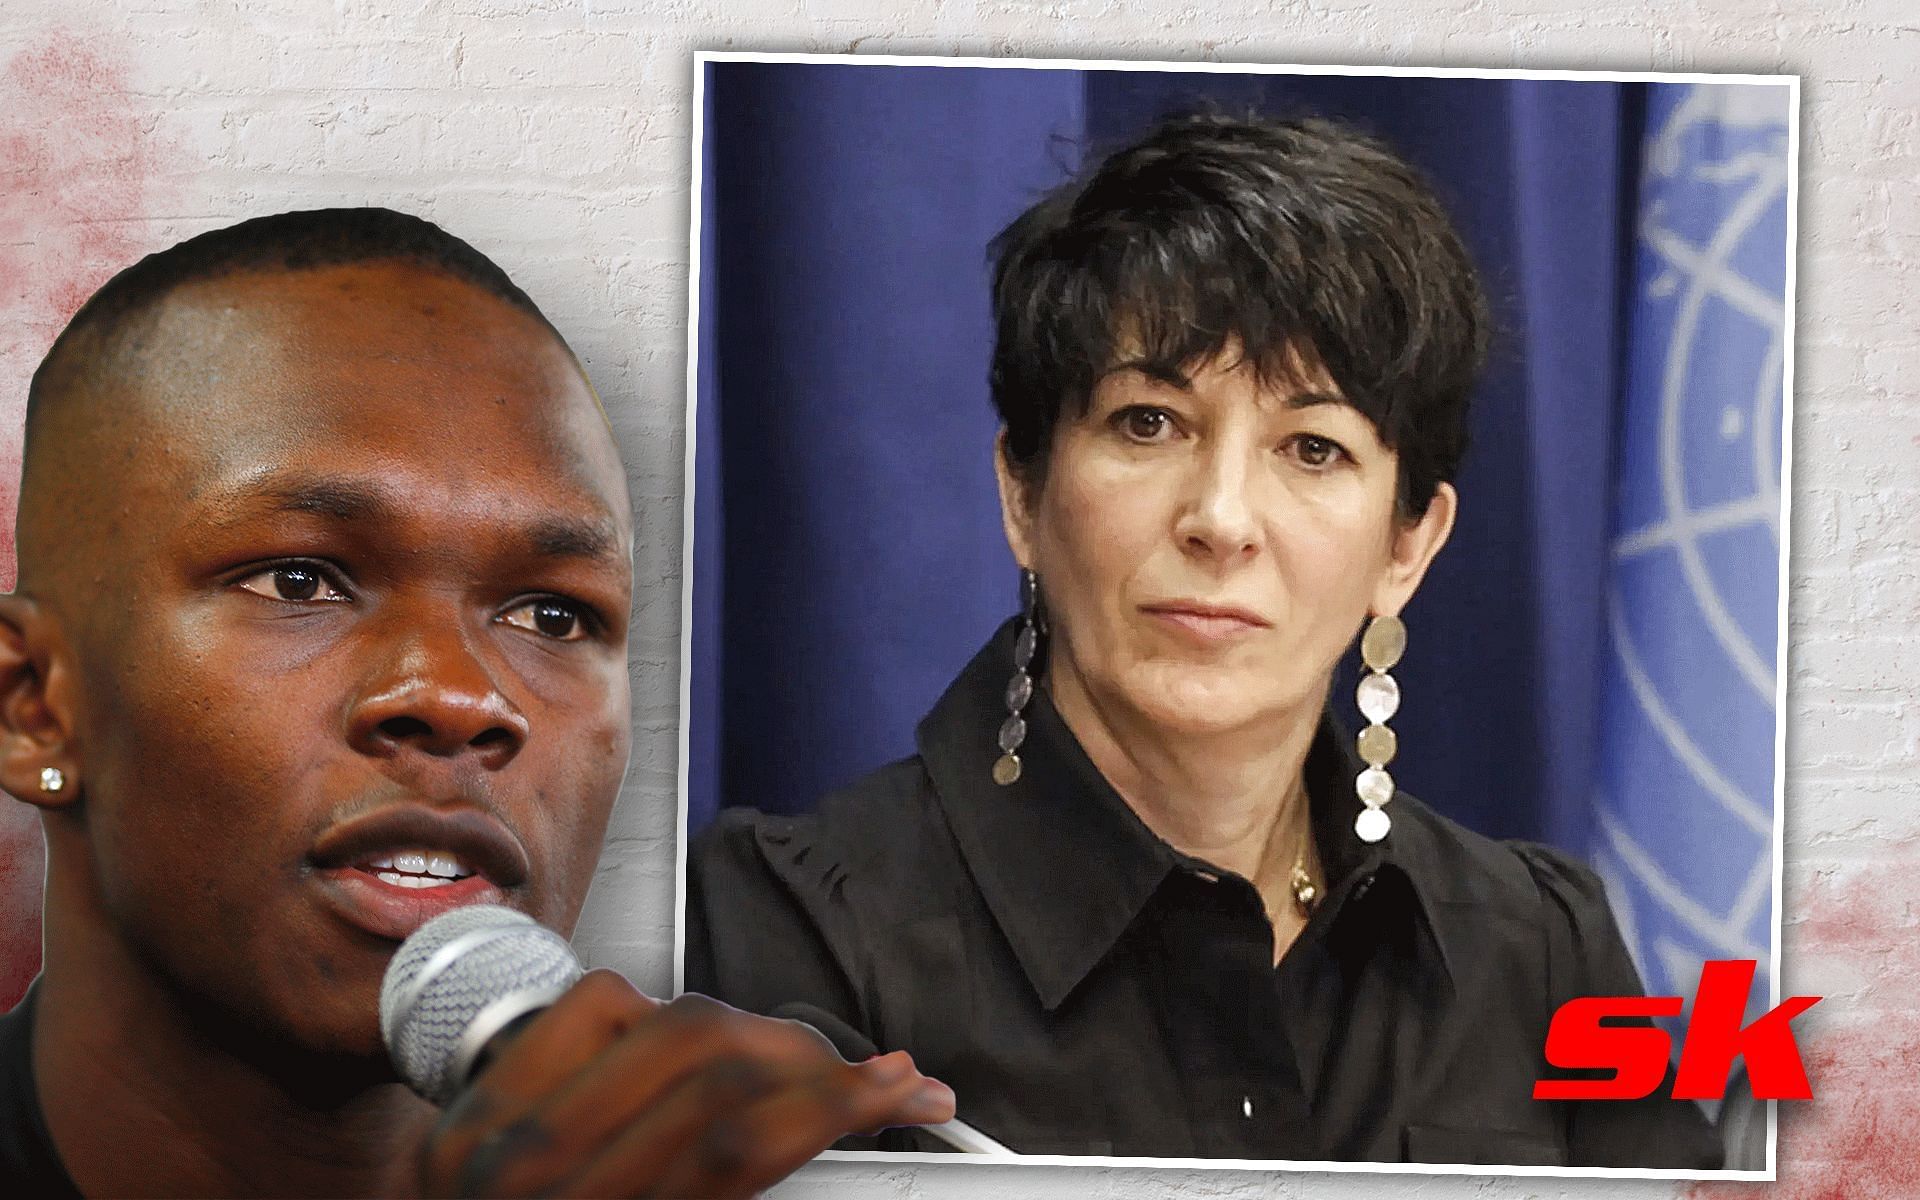 Where's the list of actors and politicians? - Israel Adesanya slams mainstream media for biased coverage of Ghislaine Maxwell sex trafficking case